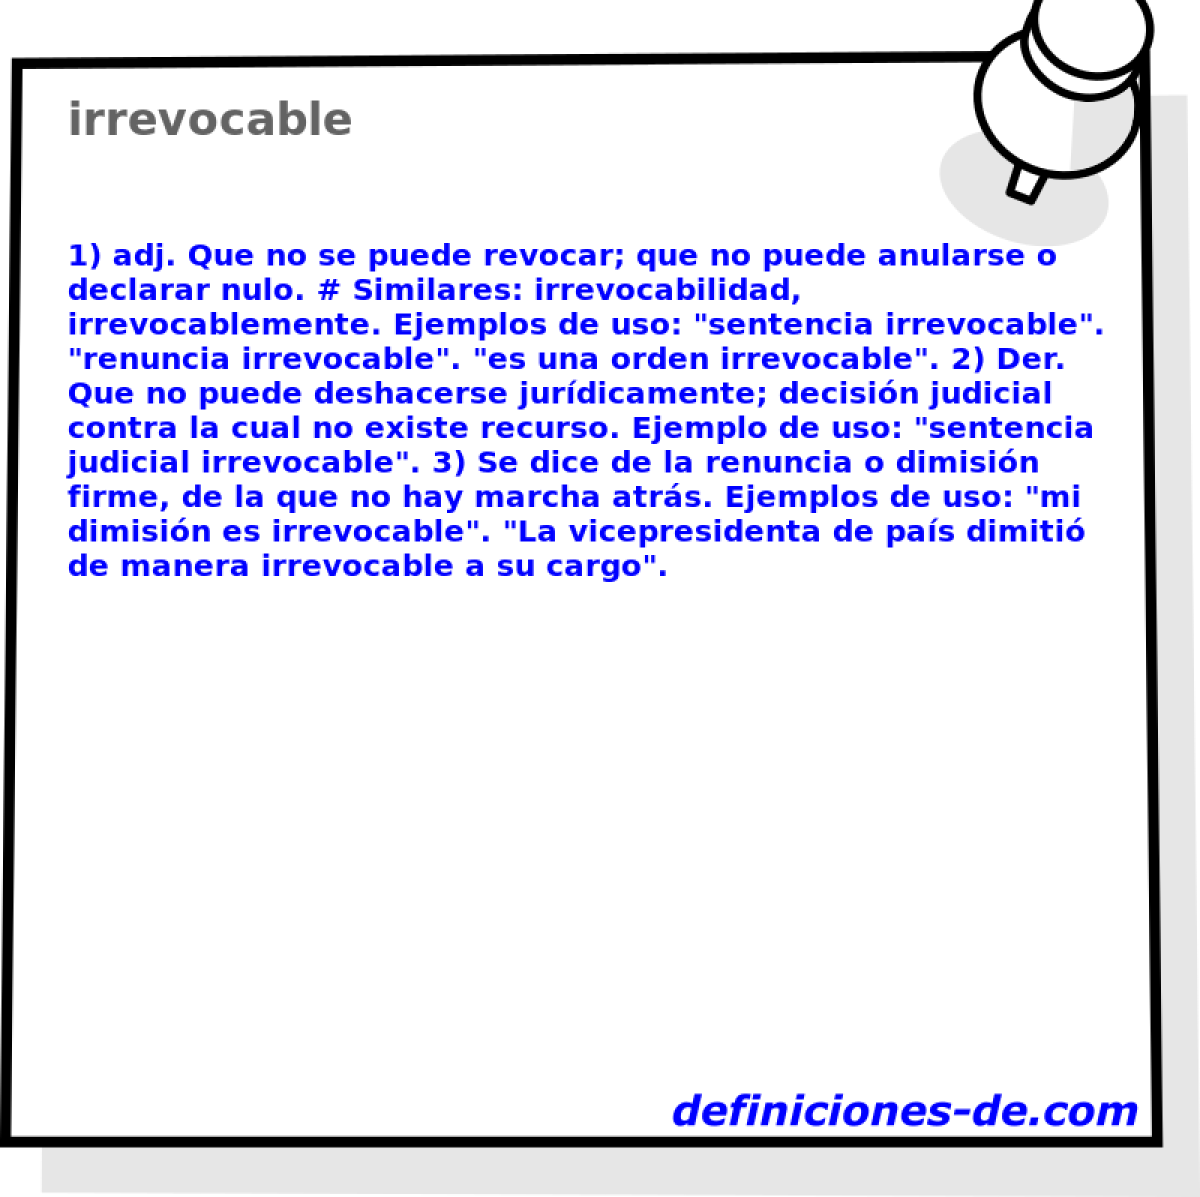 irrevocable 